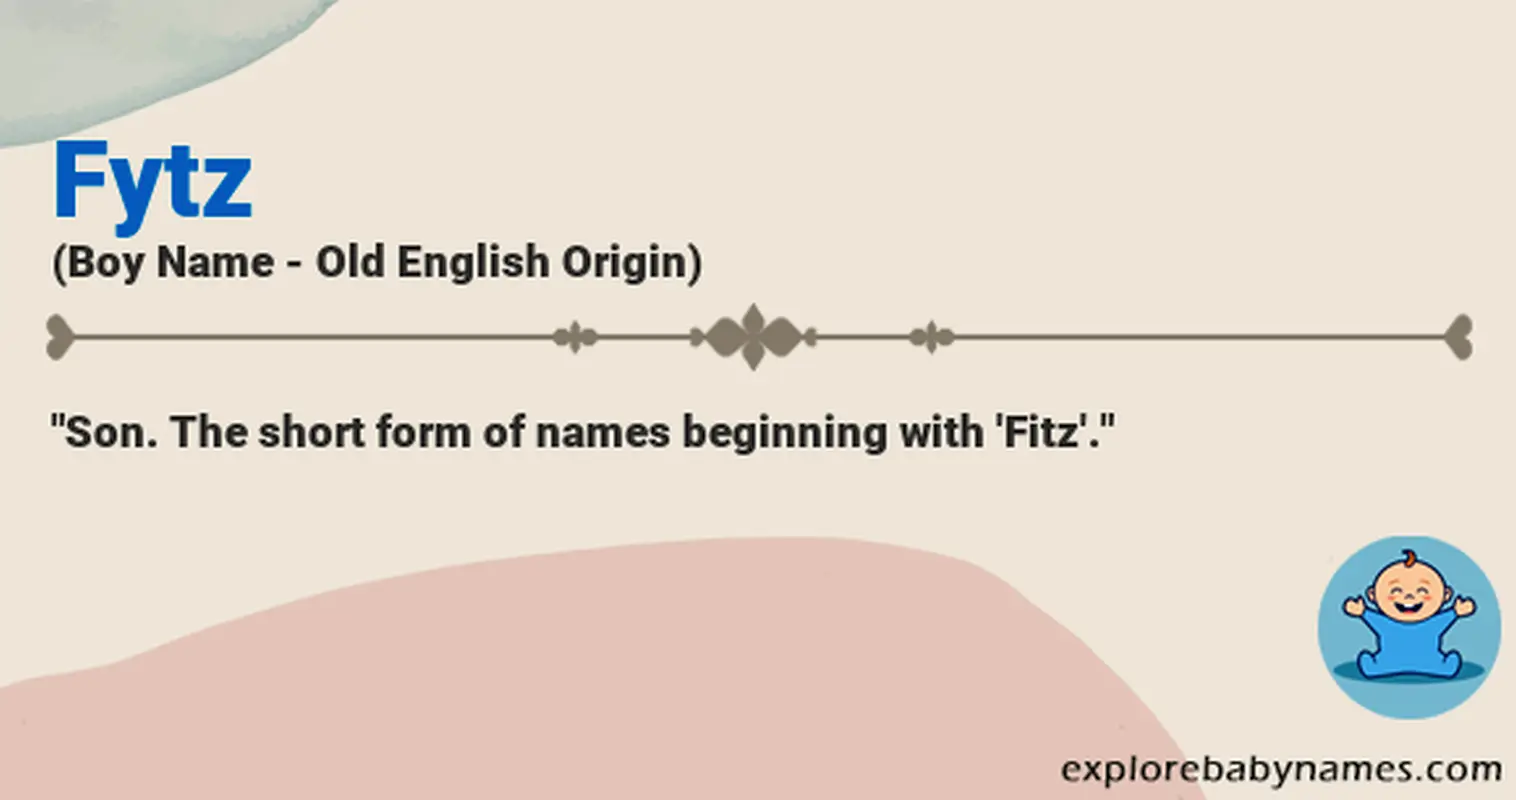 Meaning of Fytz